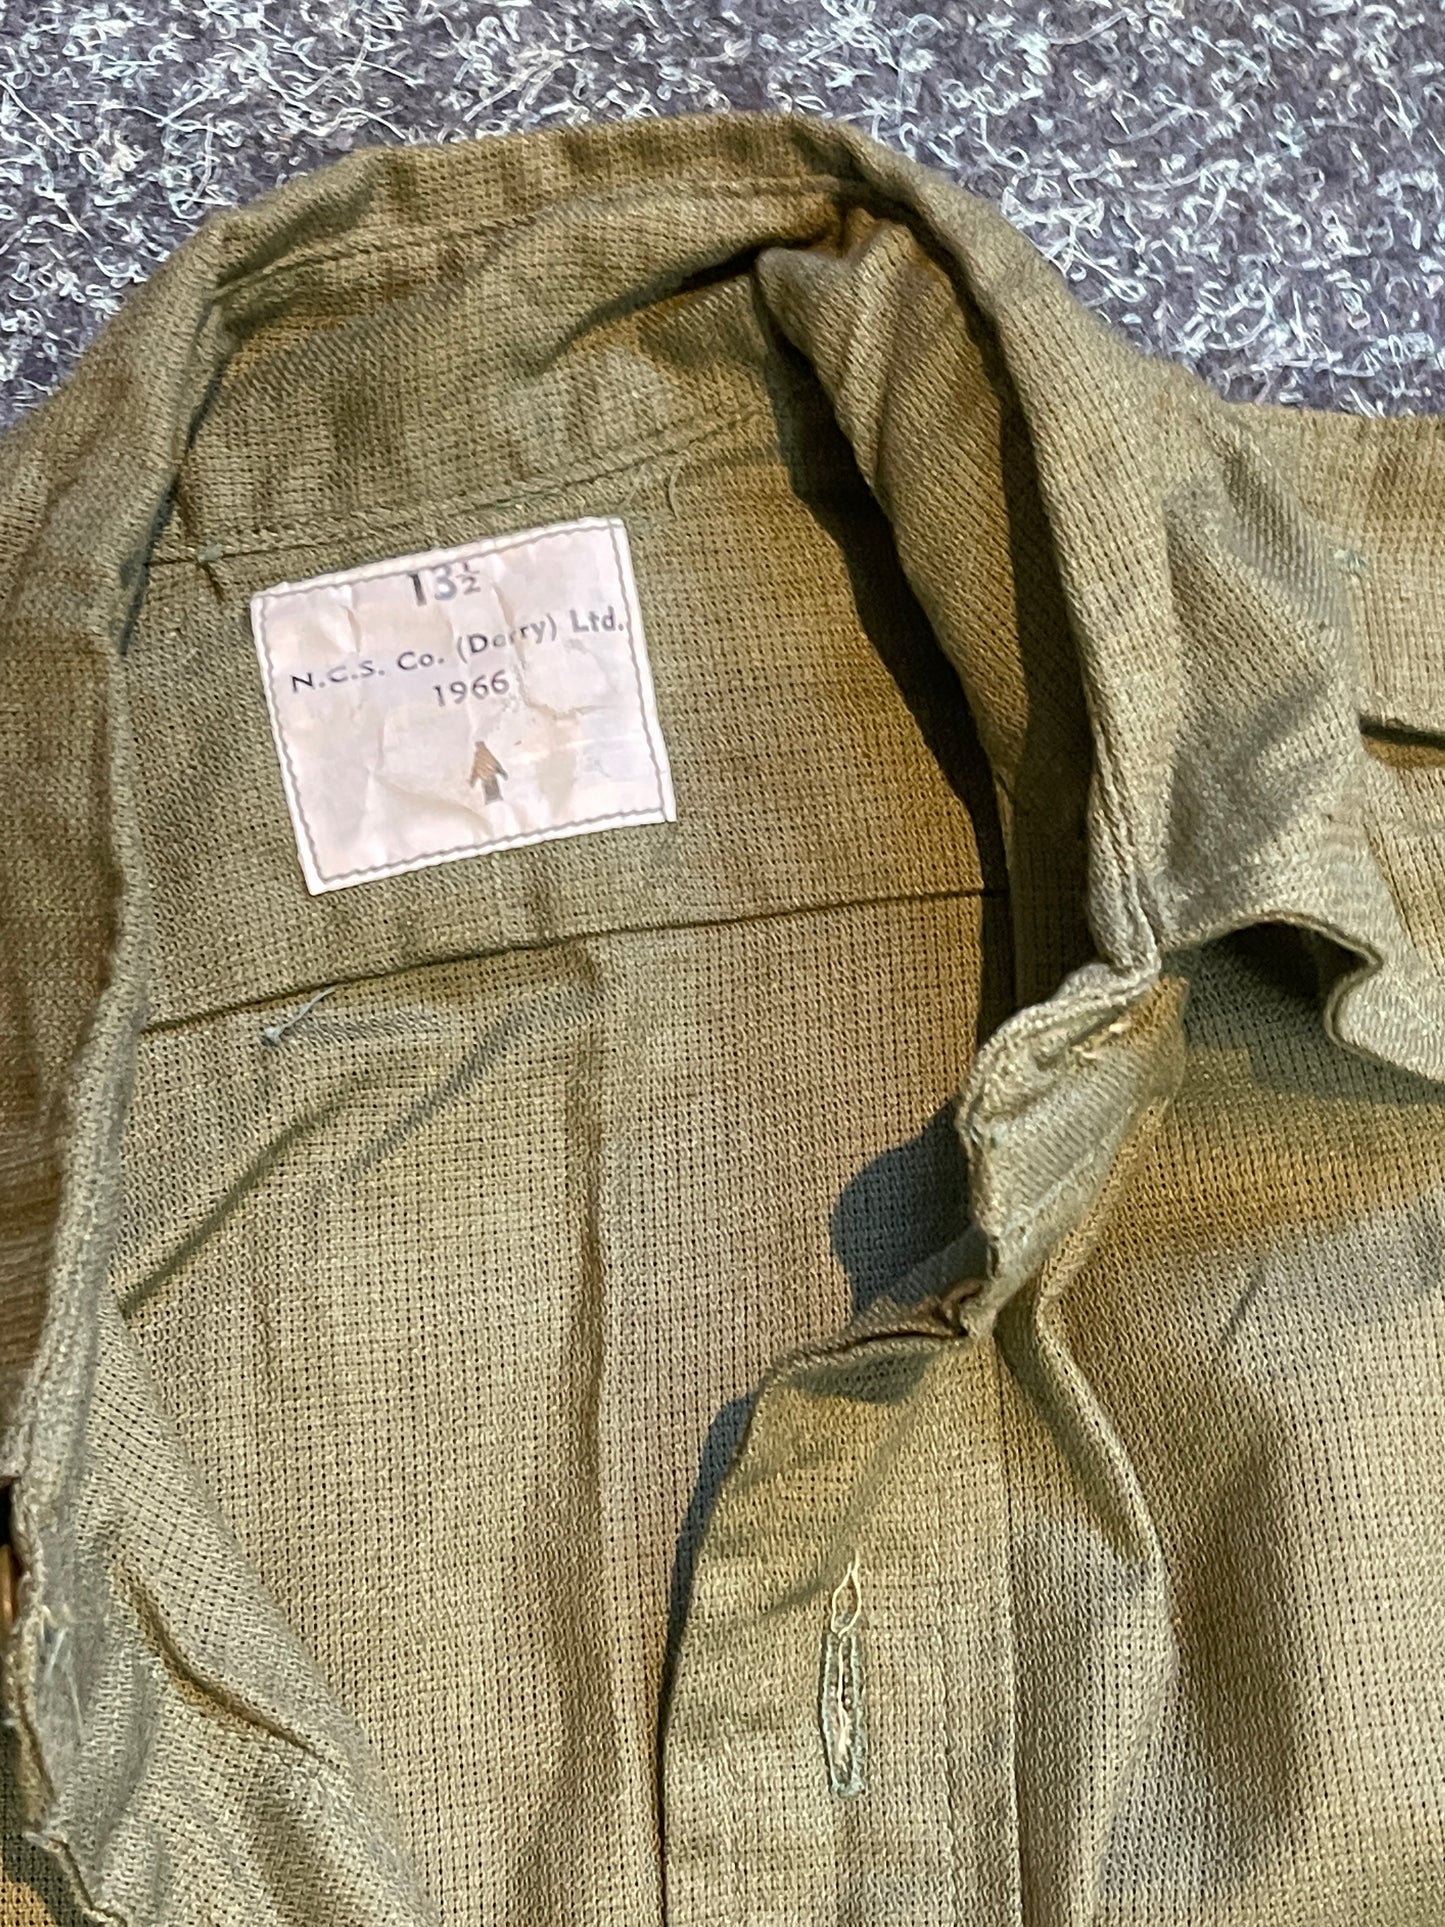 1966 Dated British Army Jungle Green Shirt showing label